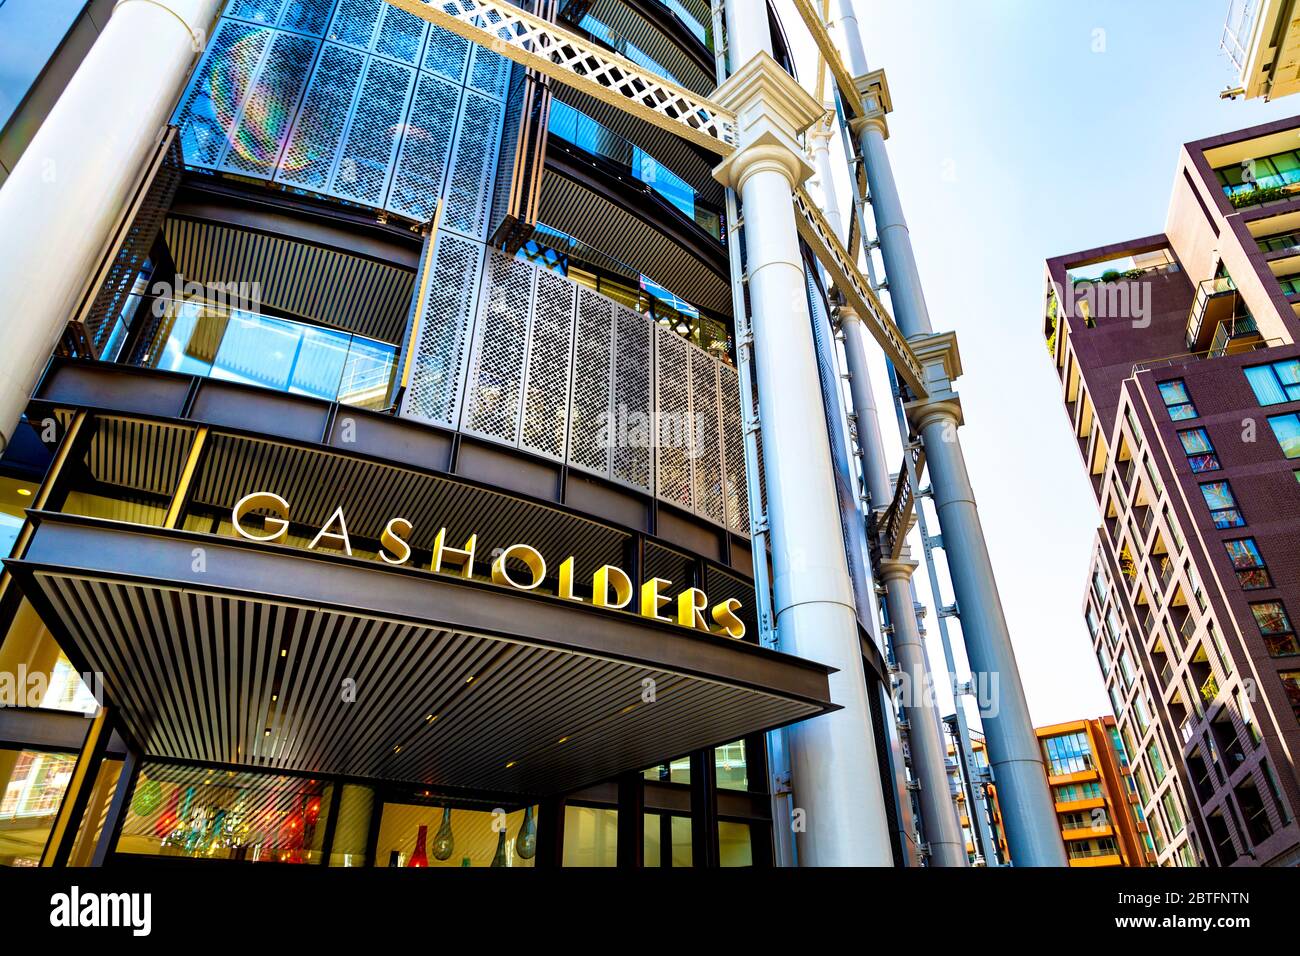 Entrance to the cylinder residential building Gasholders in Kings Cross, London, UK Stock Photo